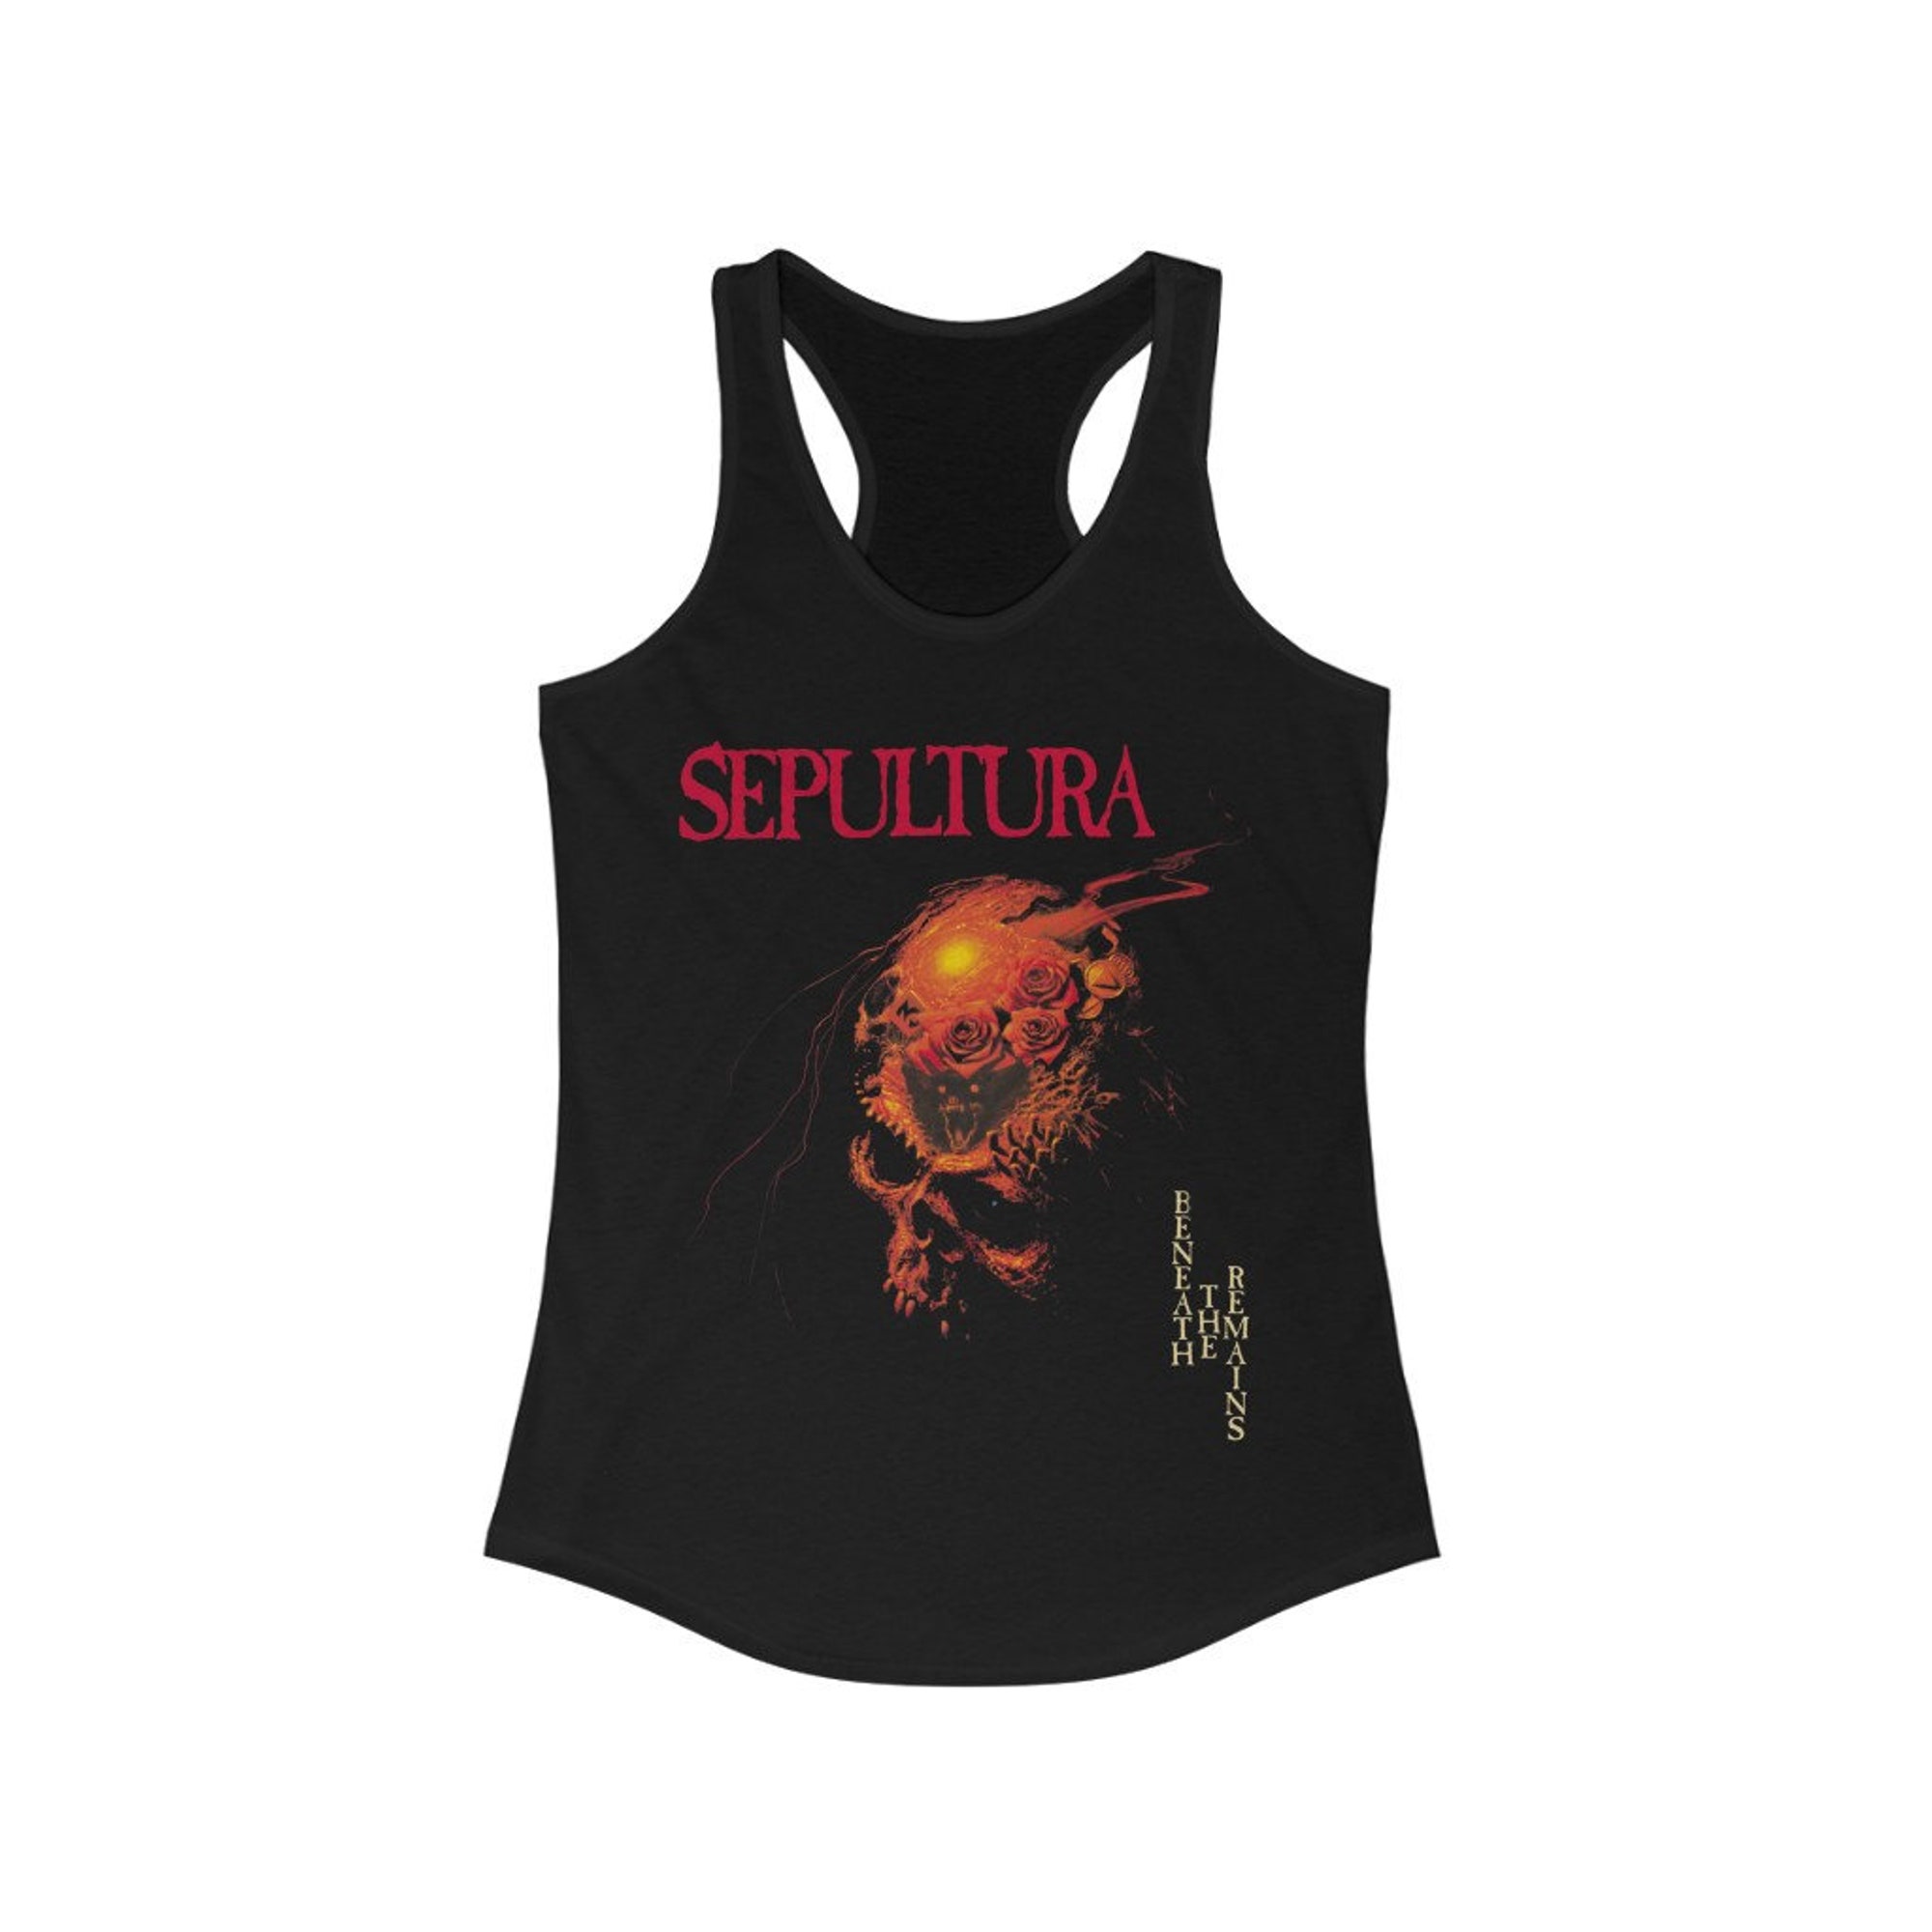 Discover Sepultura Womens tank tee - Beneath The Remains Sleeveless Top - Heavy Metal Band